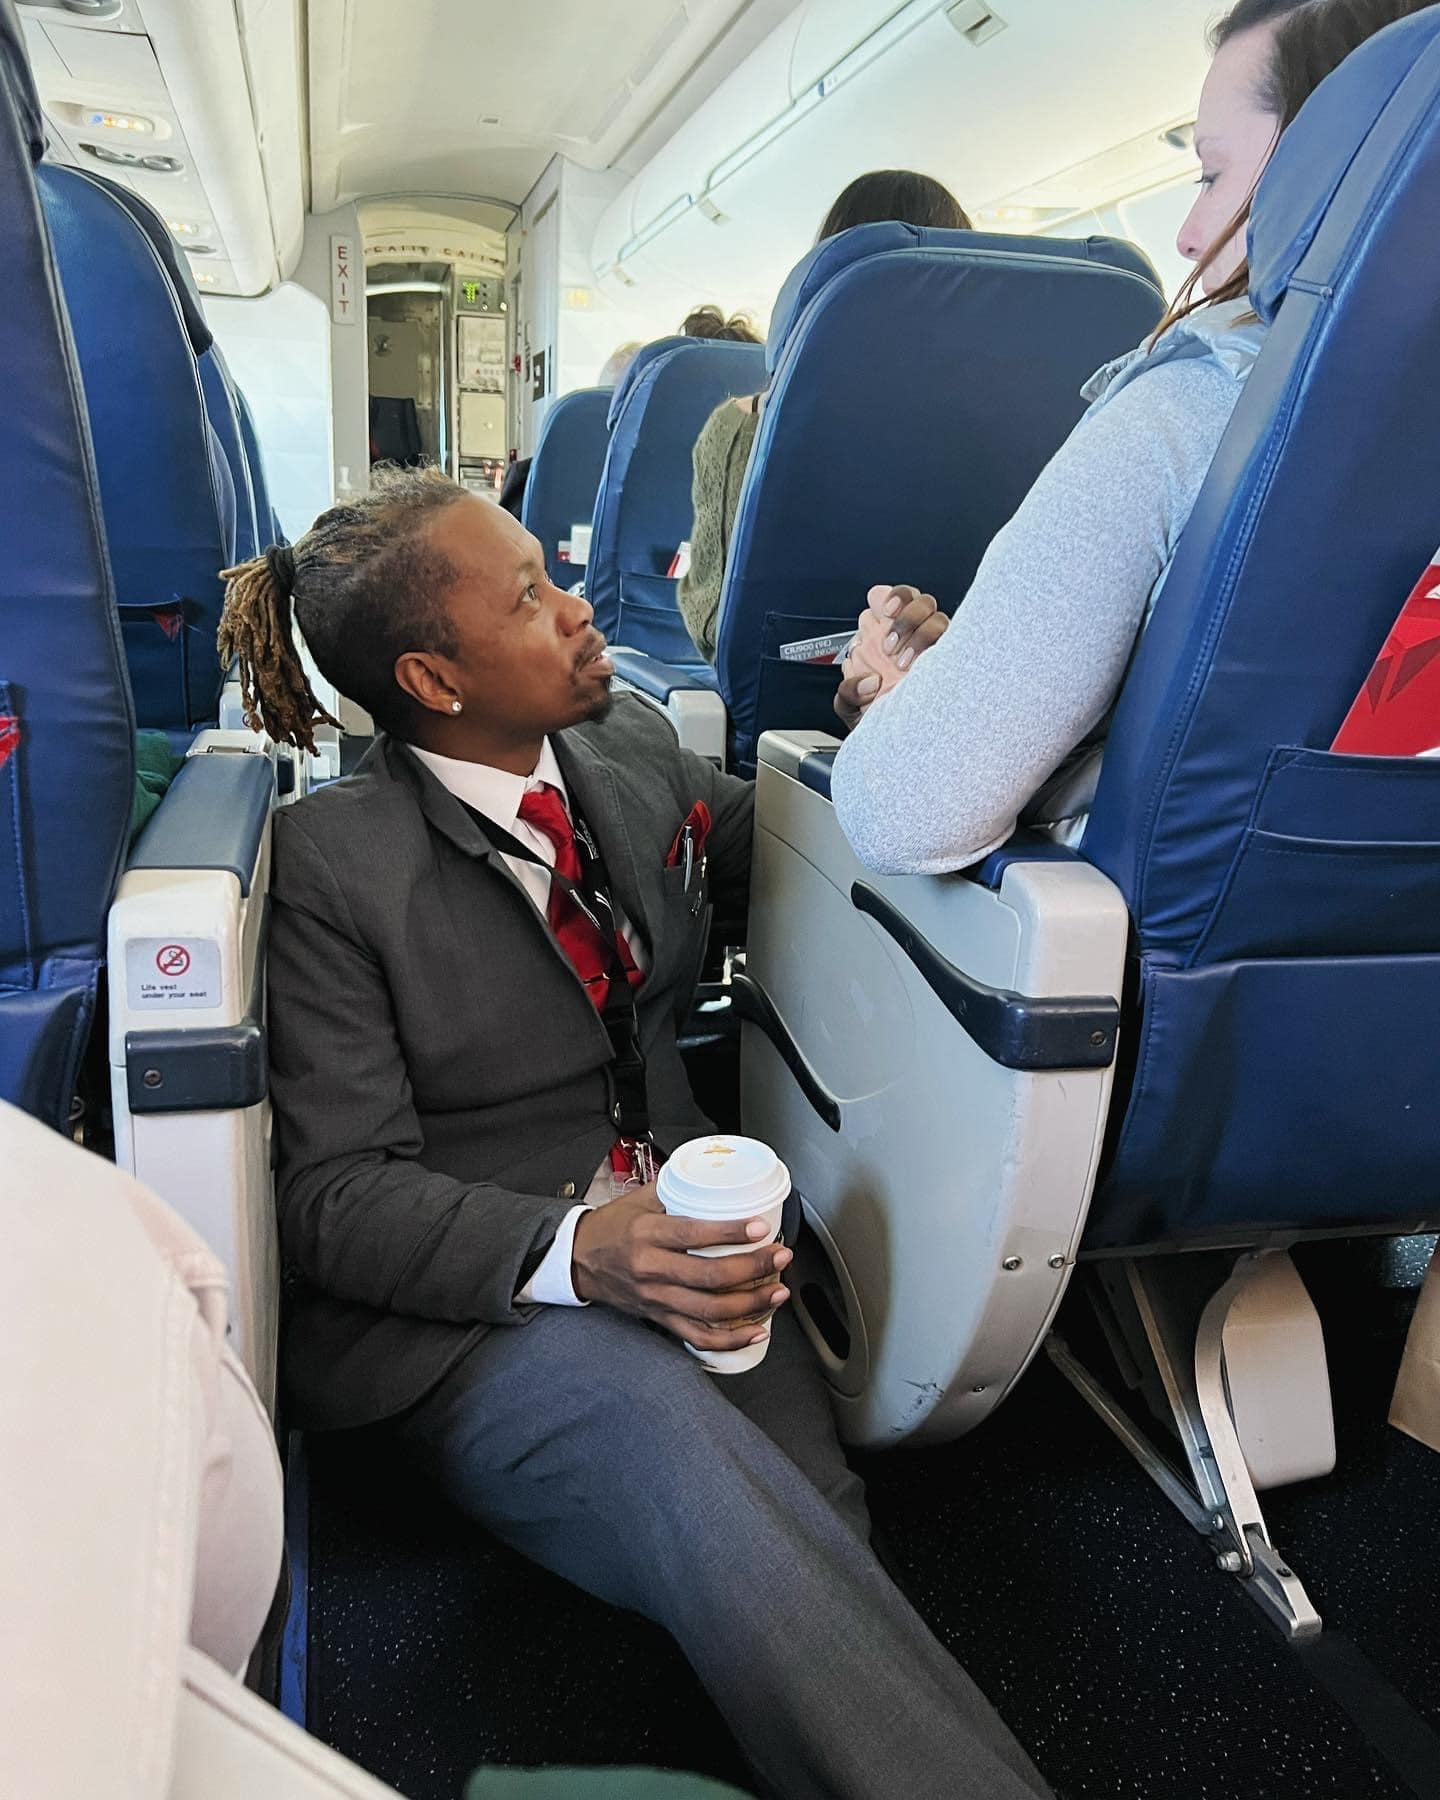 The Delta crew member sat in the aisle to hold the passenger’s hand